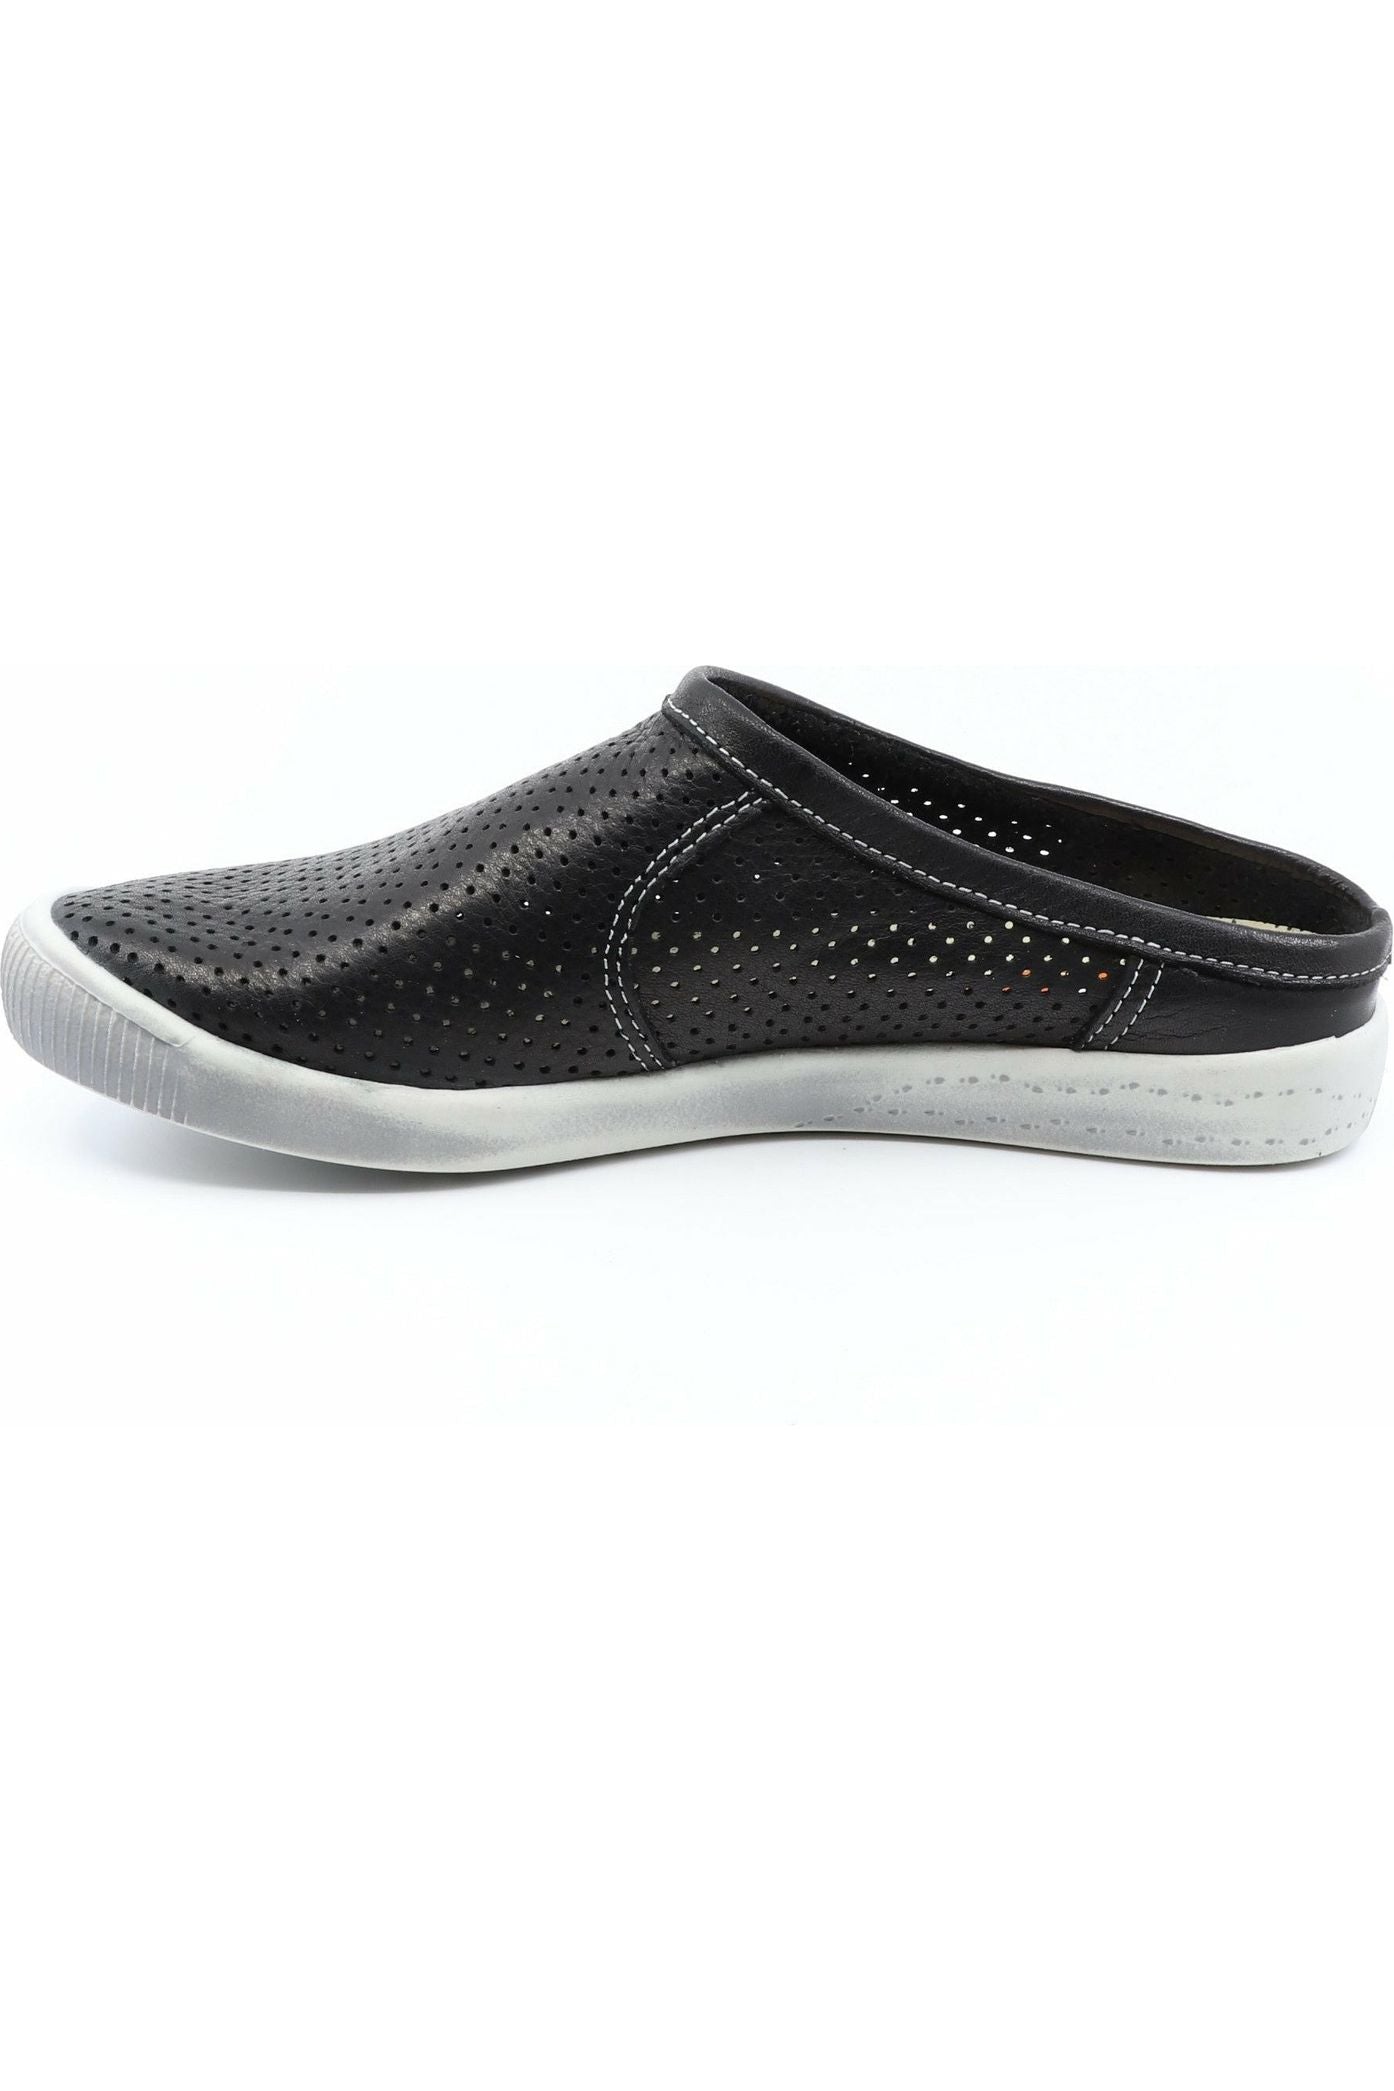 Softinos by Fly London Ima Sneaker MuleSoftinos by Fly London Sneaker Mule - Style Ima, inside